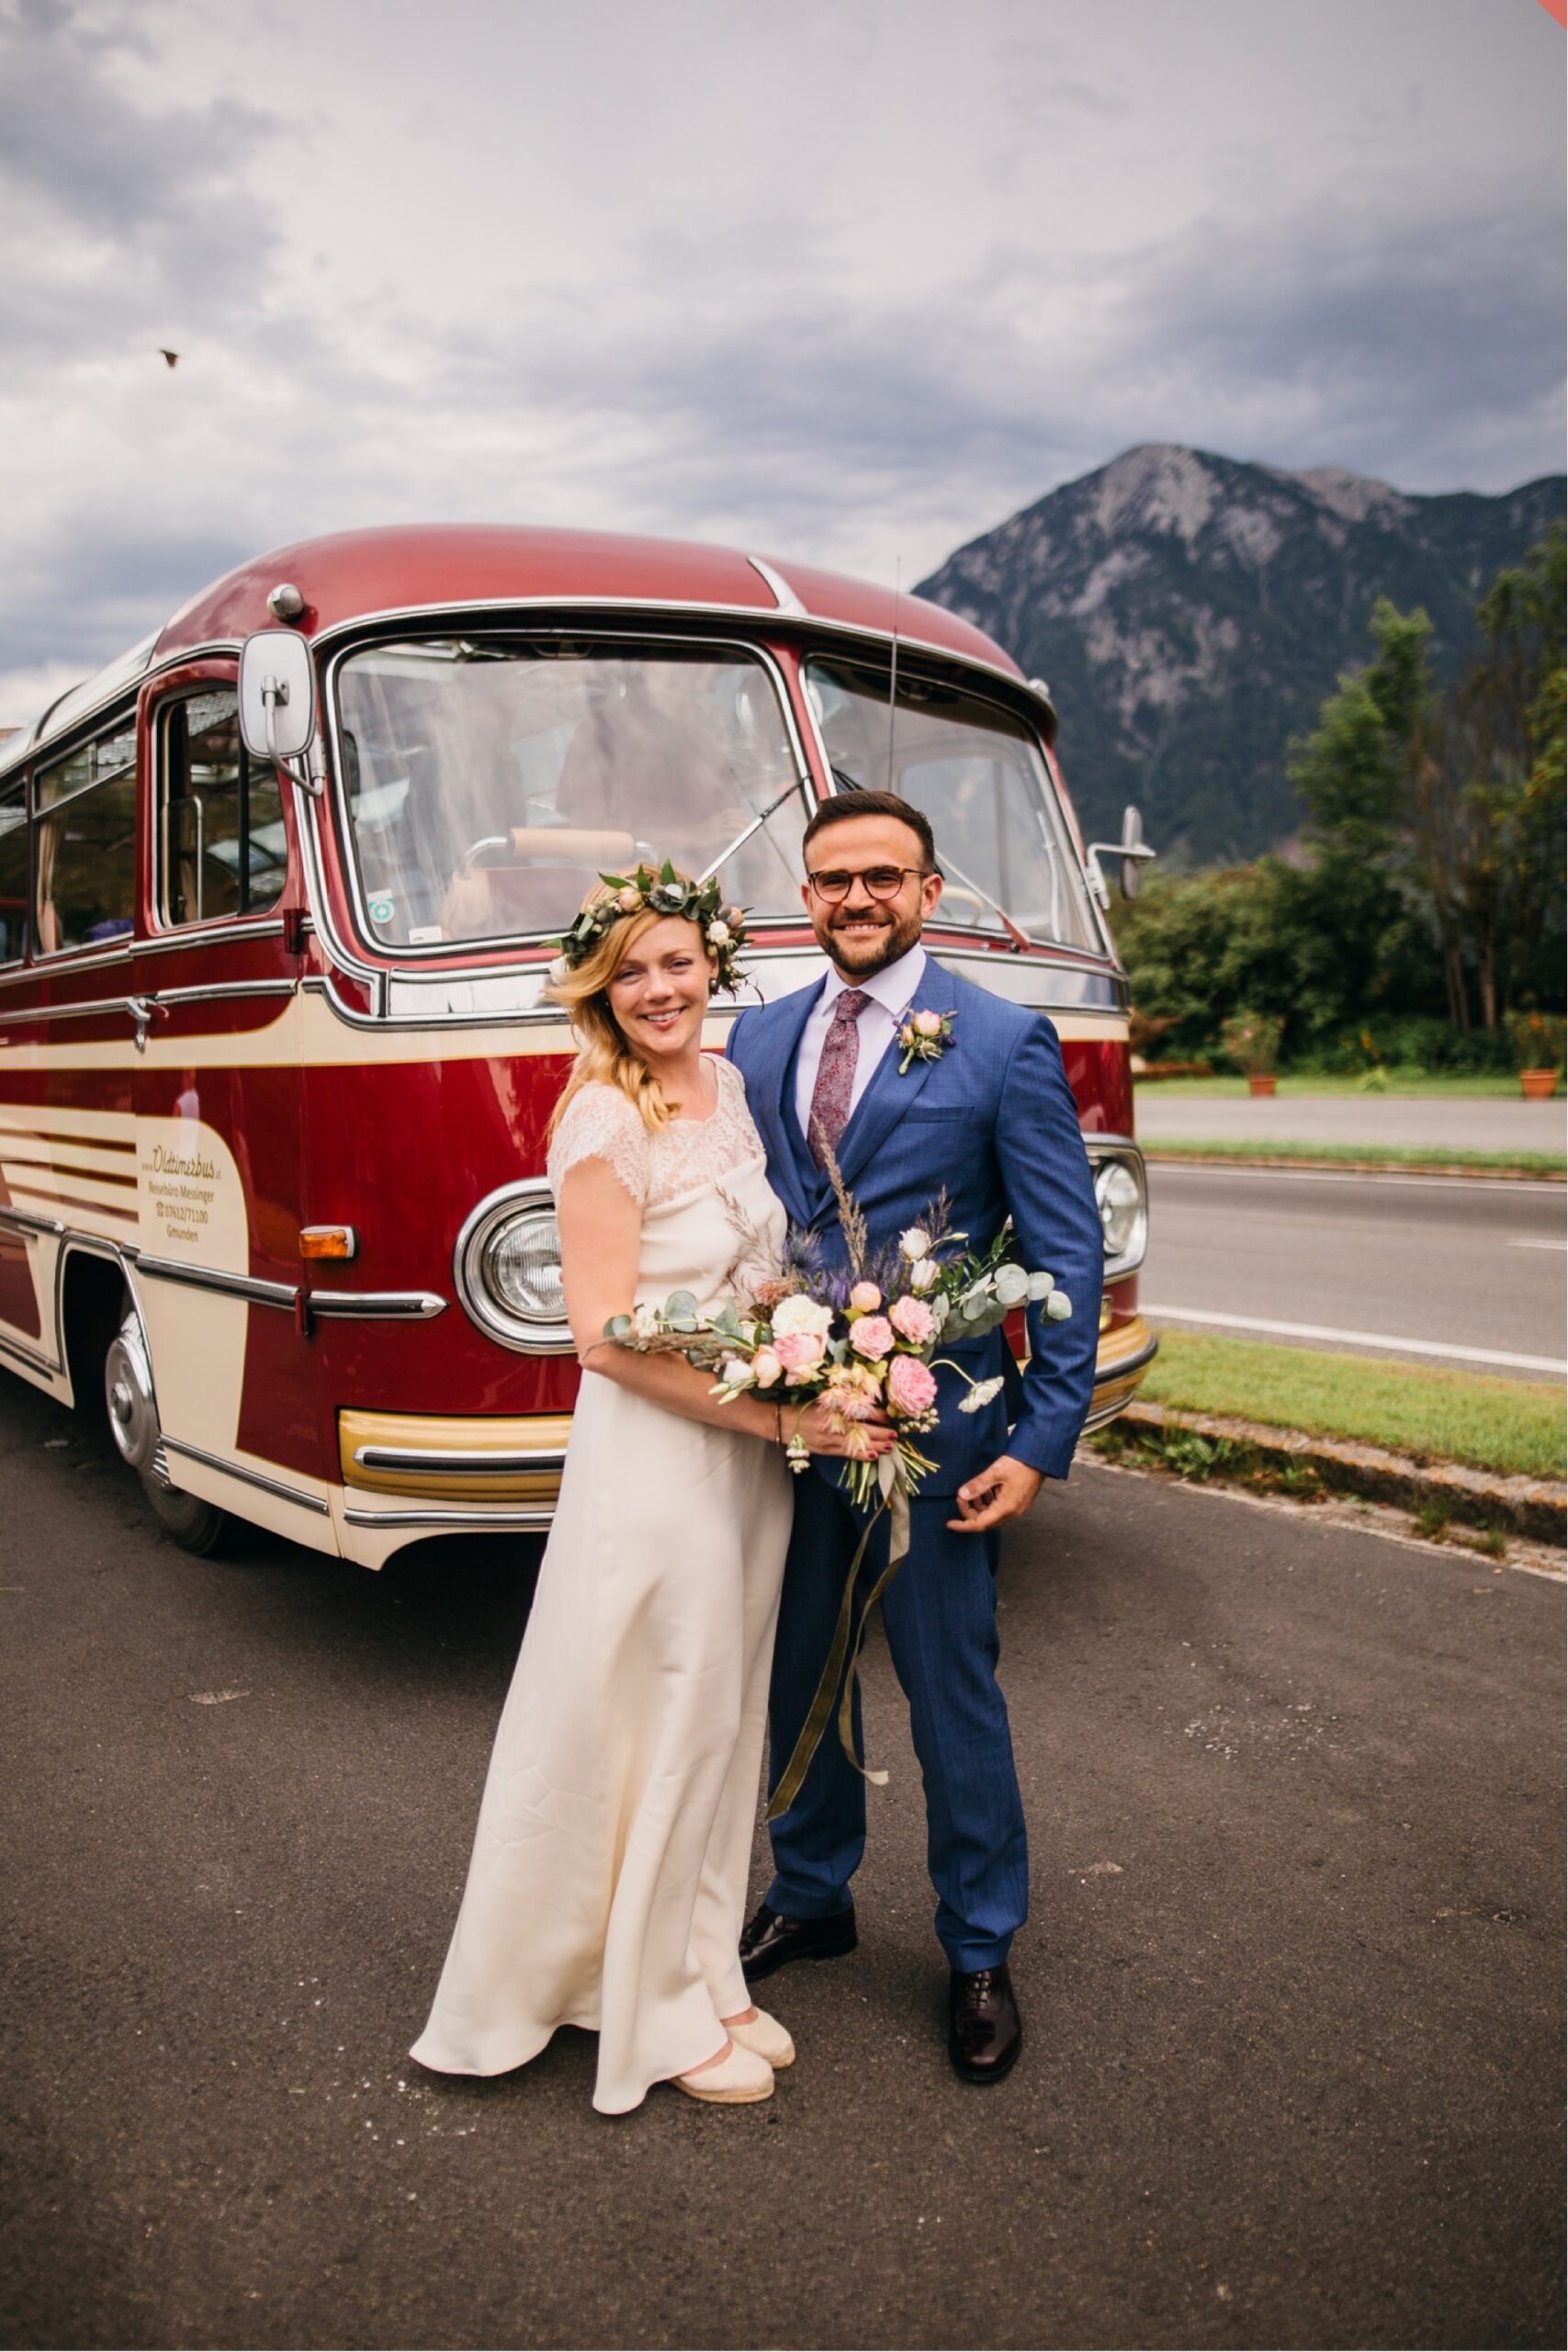 Bridge and groom pose together in front of a vintage bus.